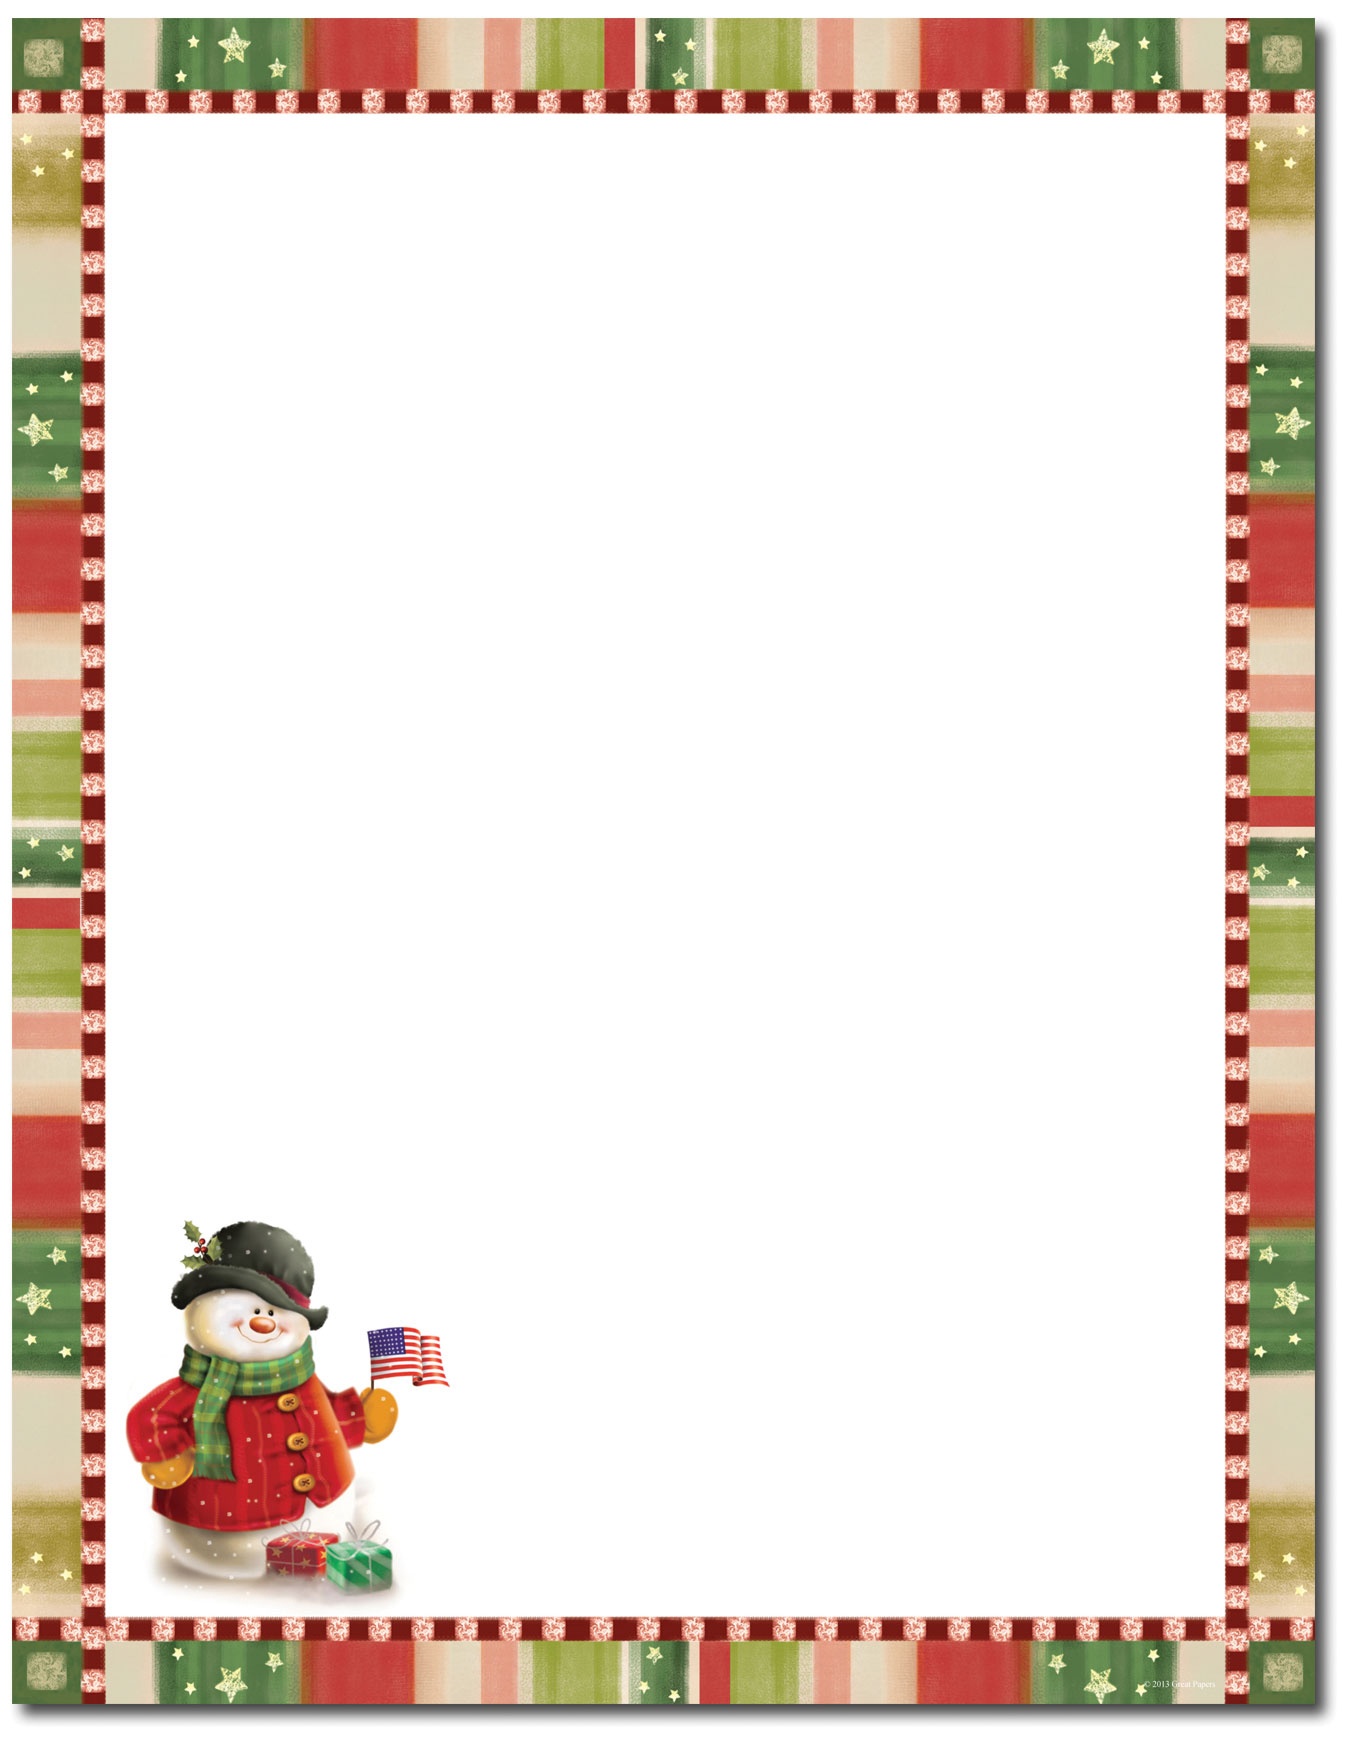 Free Christmas Stationary Cliparts, Download Free Clip Art, Free - Free Printable Christmas Stationary Paper